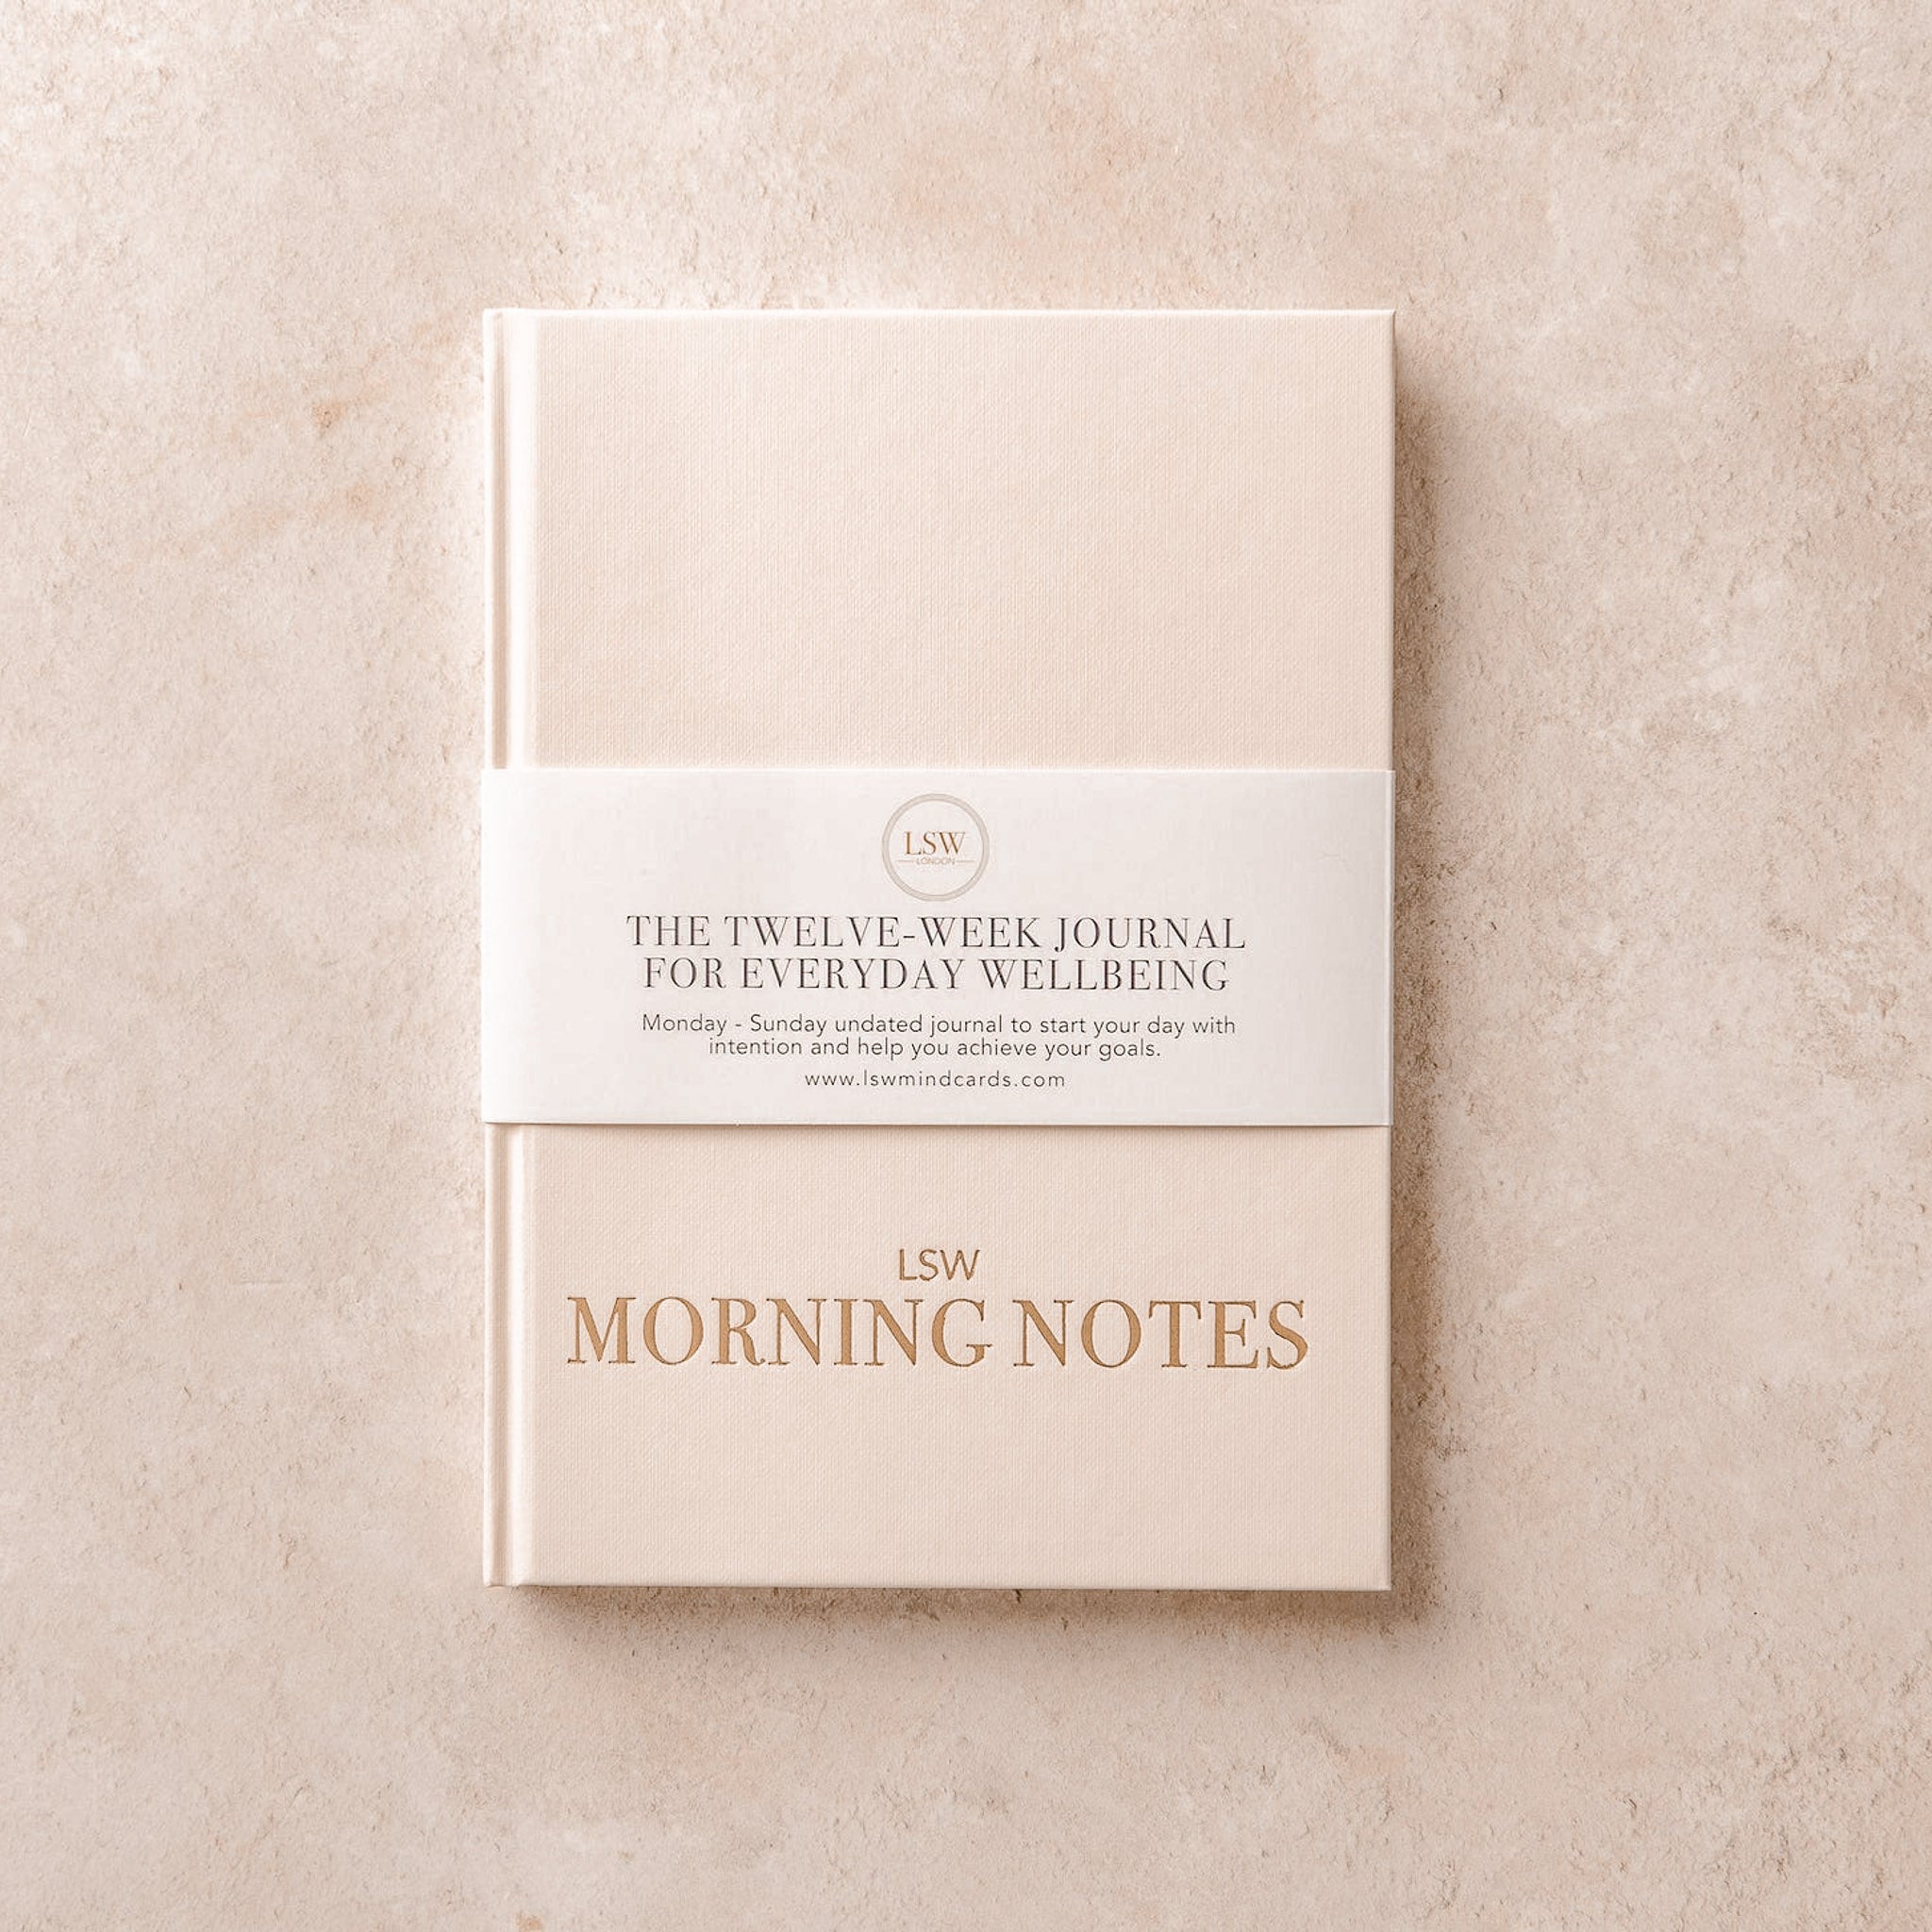 LSW Morning Notes - 12 Week Journal - Native Self